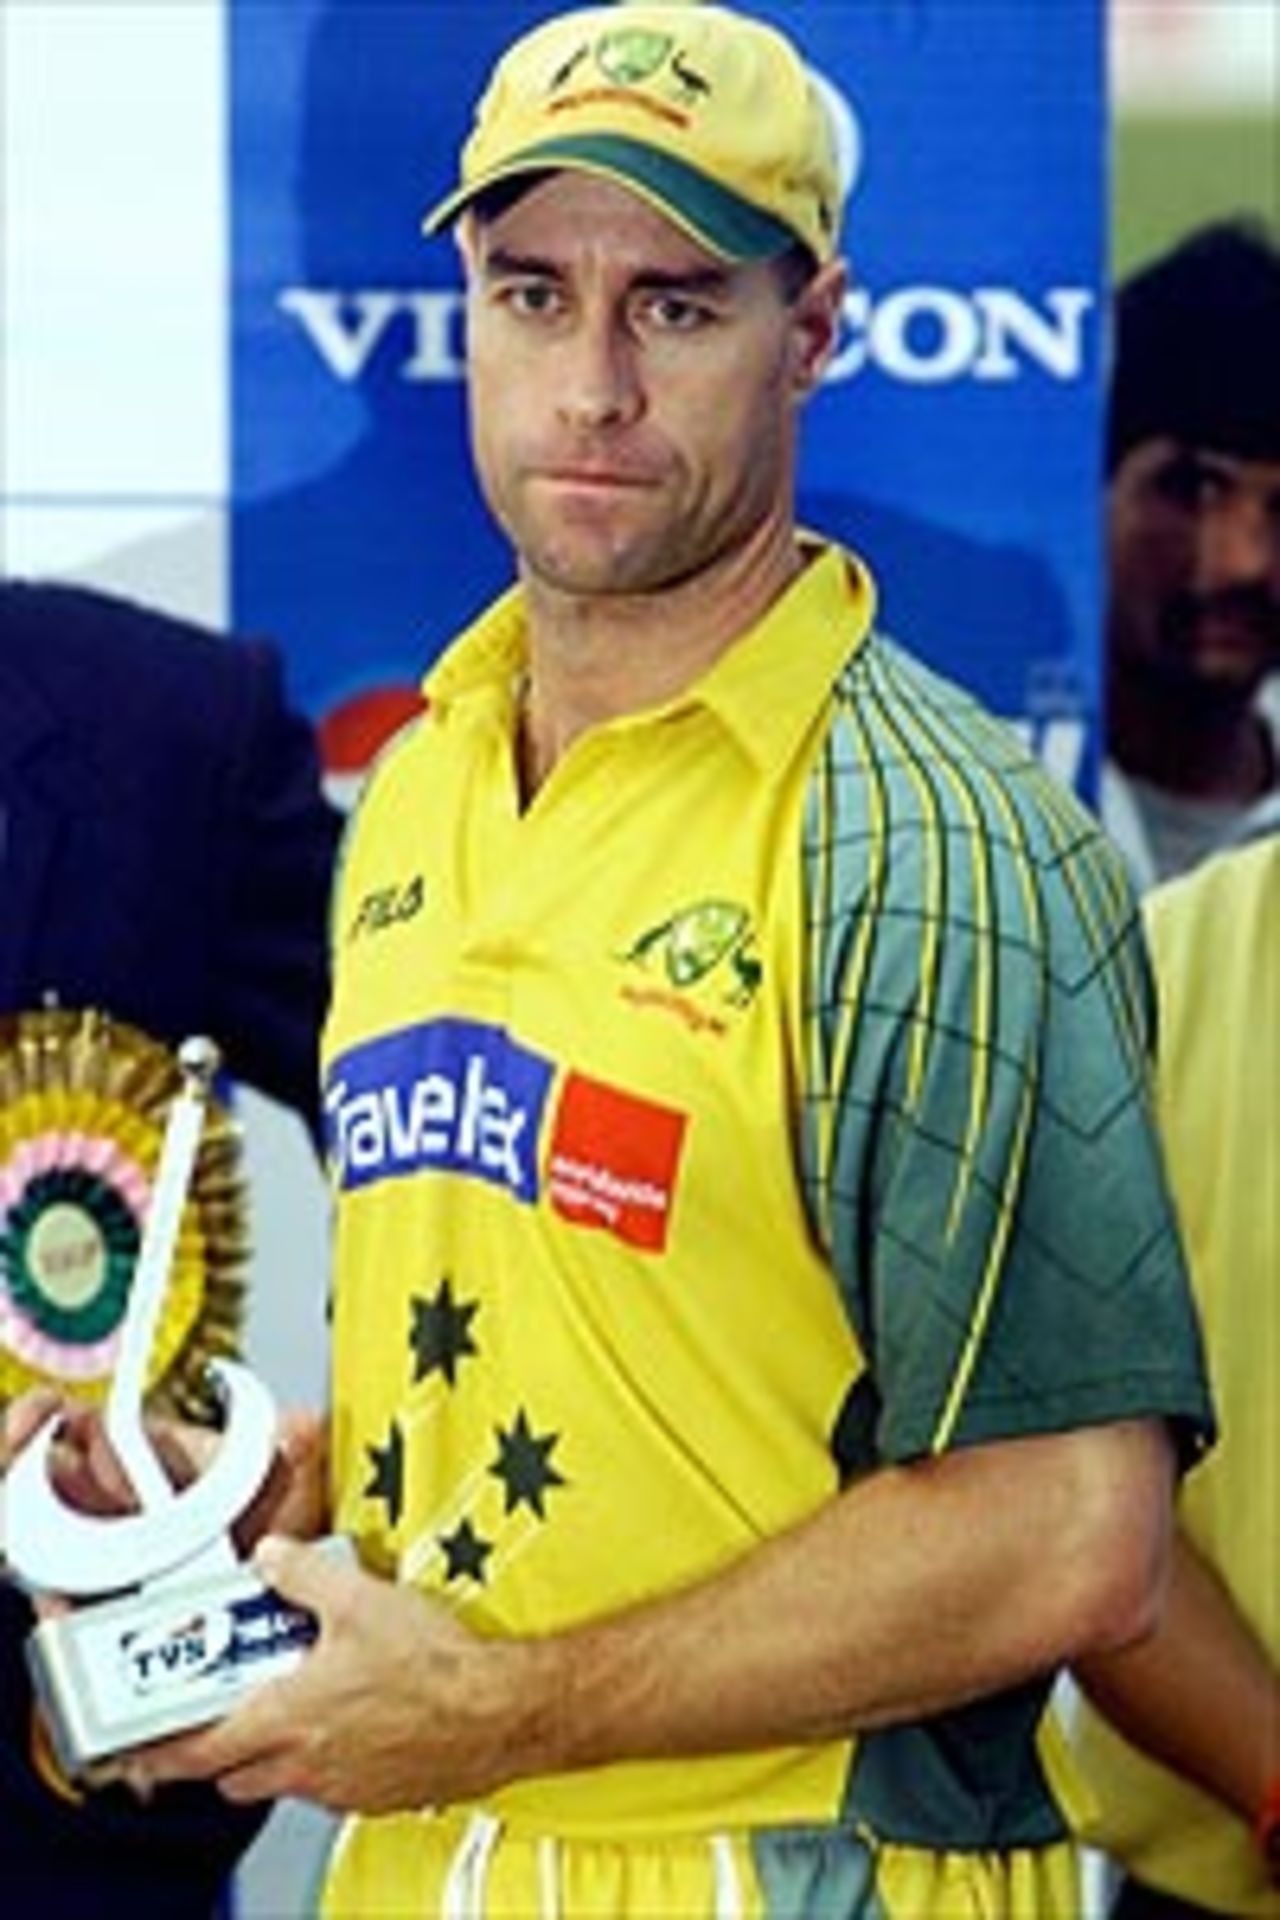 Australian cricketer Michael Bevan poses with the Man of the Match trophy during the prize distribution ceremony of the TVS tri-series One Day International match between New Zealand and Australia, at the Nehru Stadium in Guwahati, 09 November 2003.